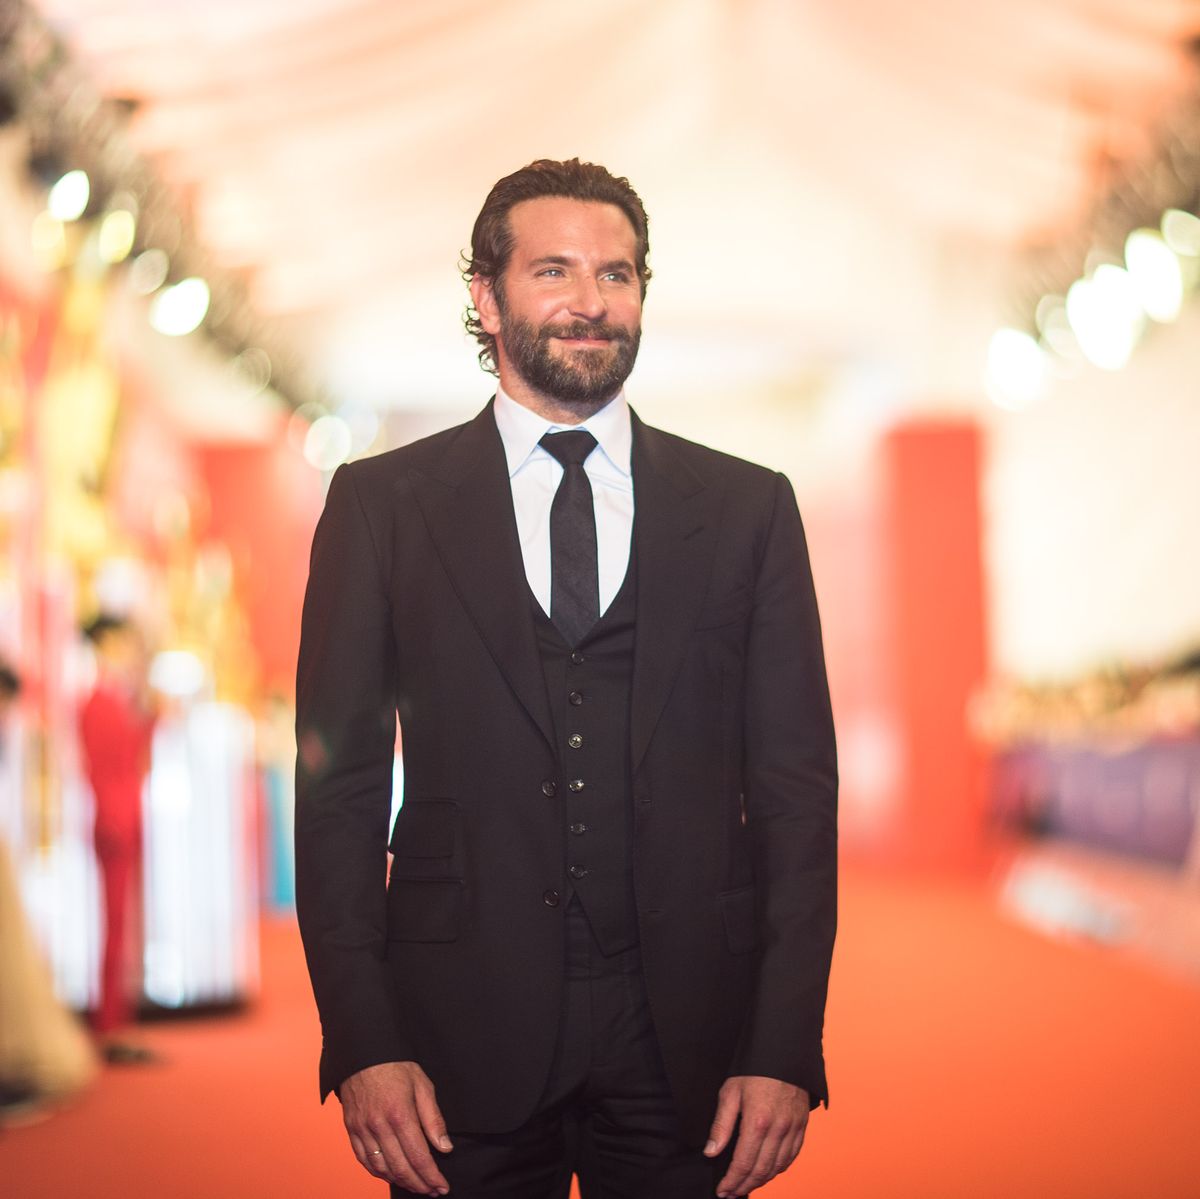 shanghai, china   june 11  actor bradley cooper walks the red carpet of the 19th shanghai international film festival at shanghai grand theatre on june 11, 2016 in shanghai, china  photo by visual chinagetty images